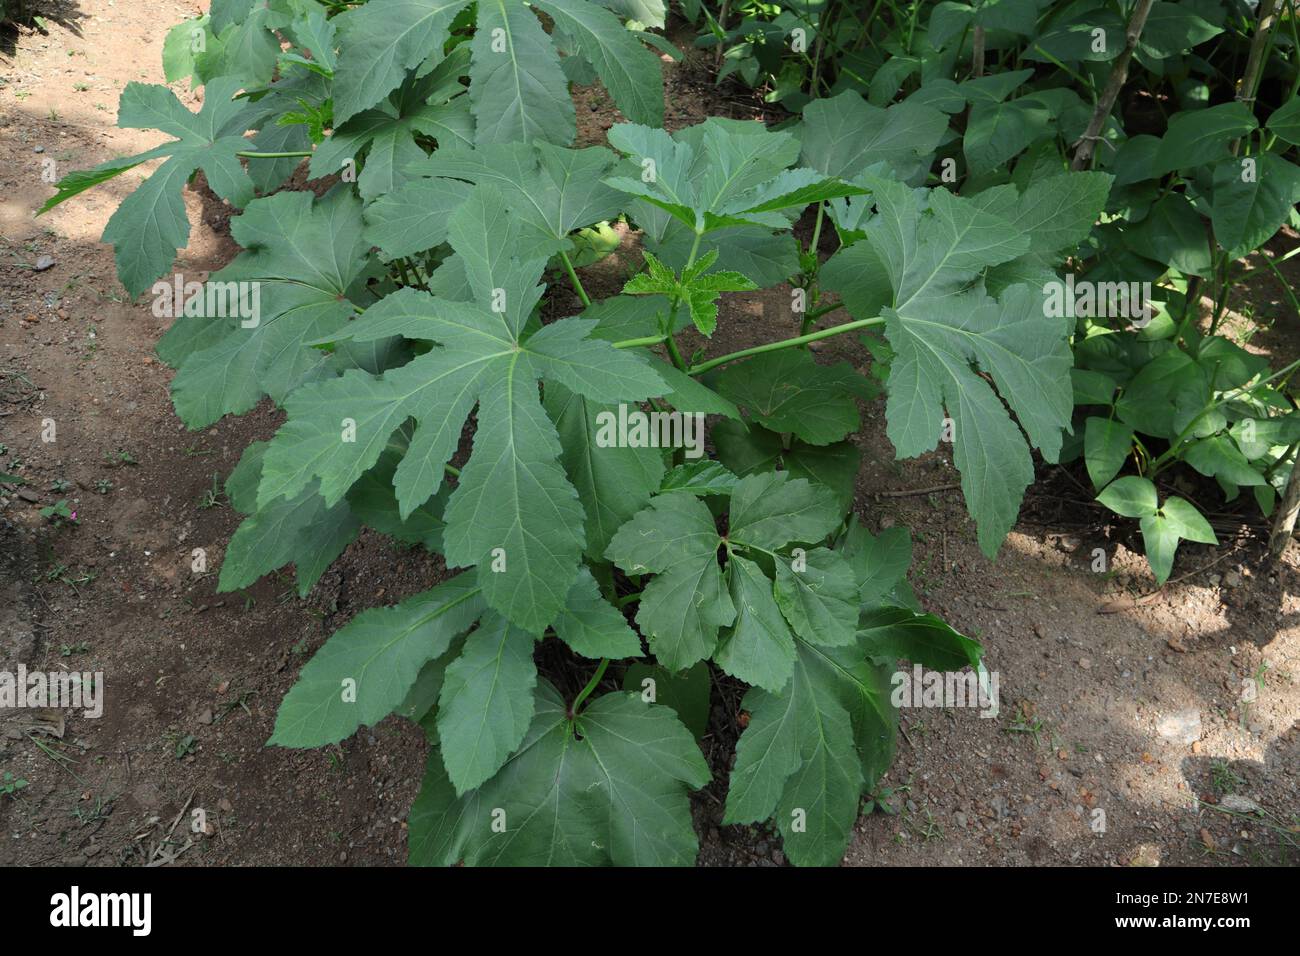 A mature Ladies' fingers or Okra plant (Abelmoschus Esculentus) in the home garden ready for flowering Stock Photo